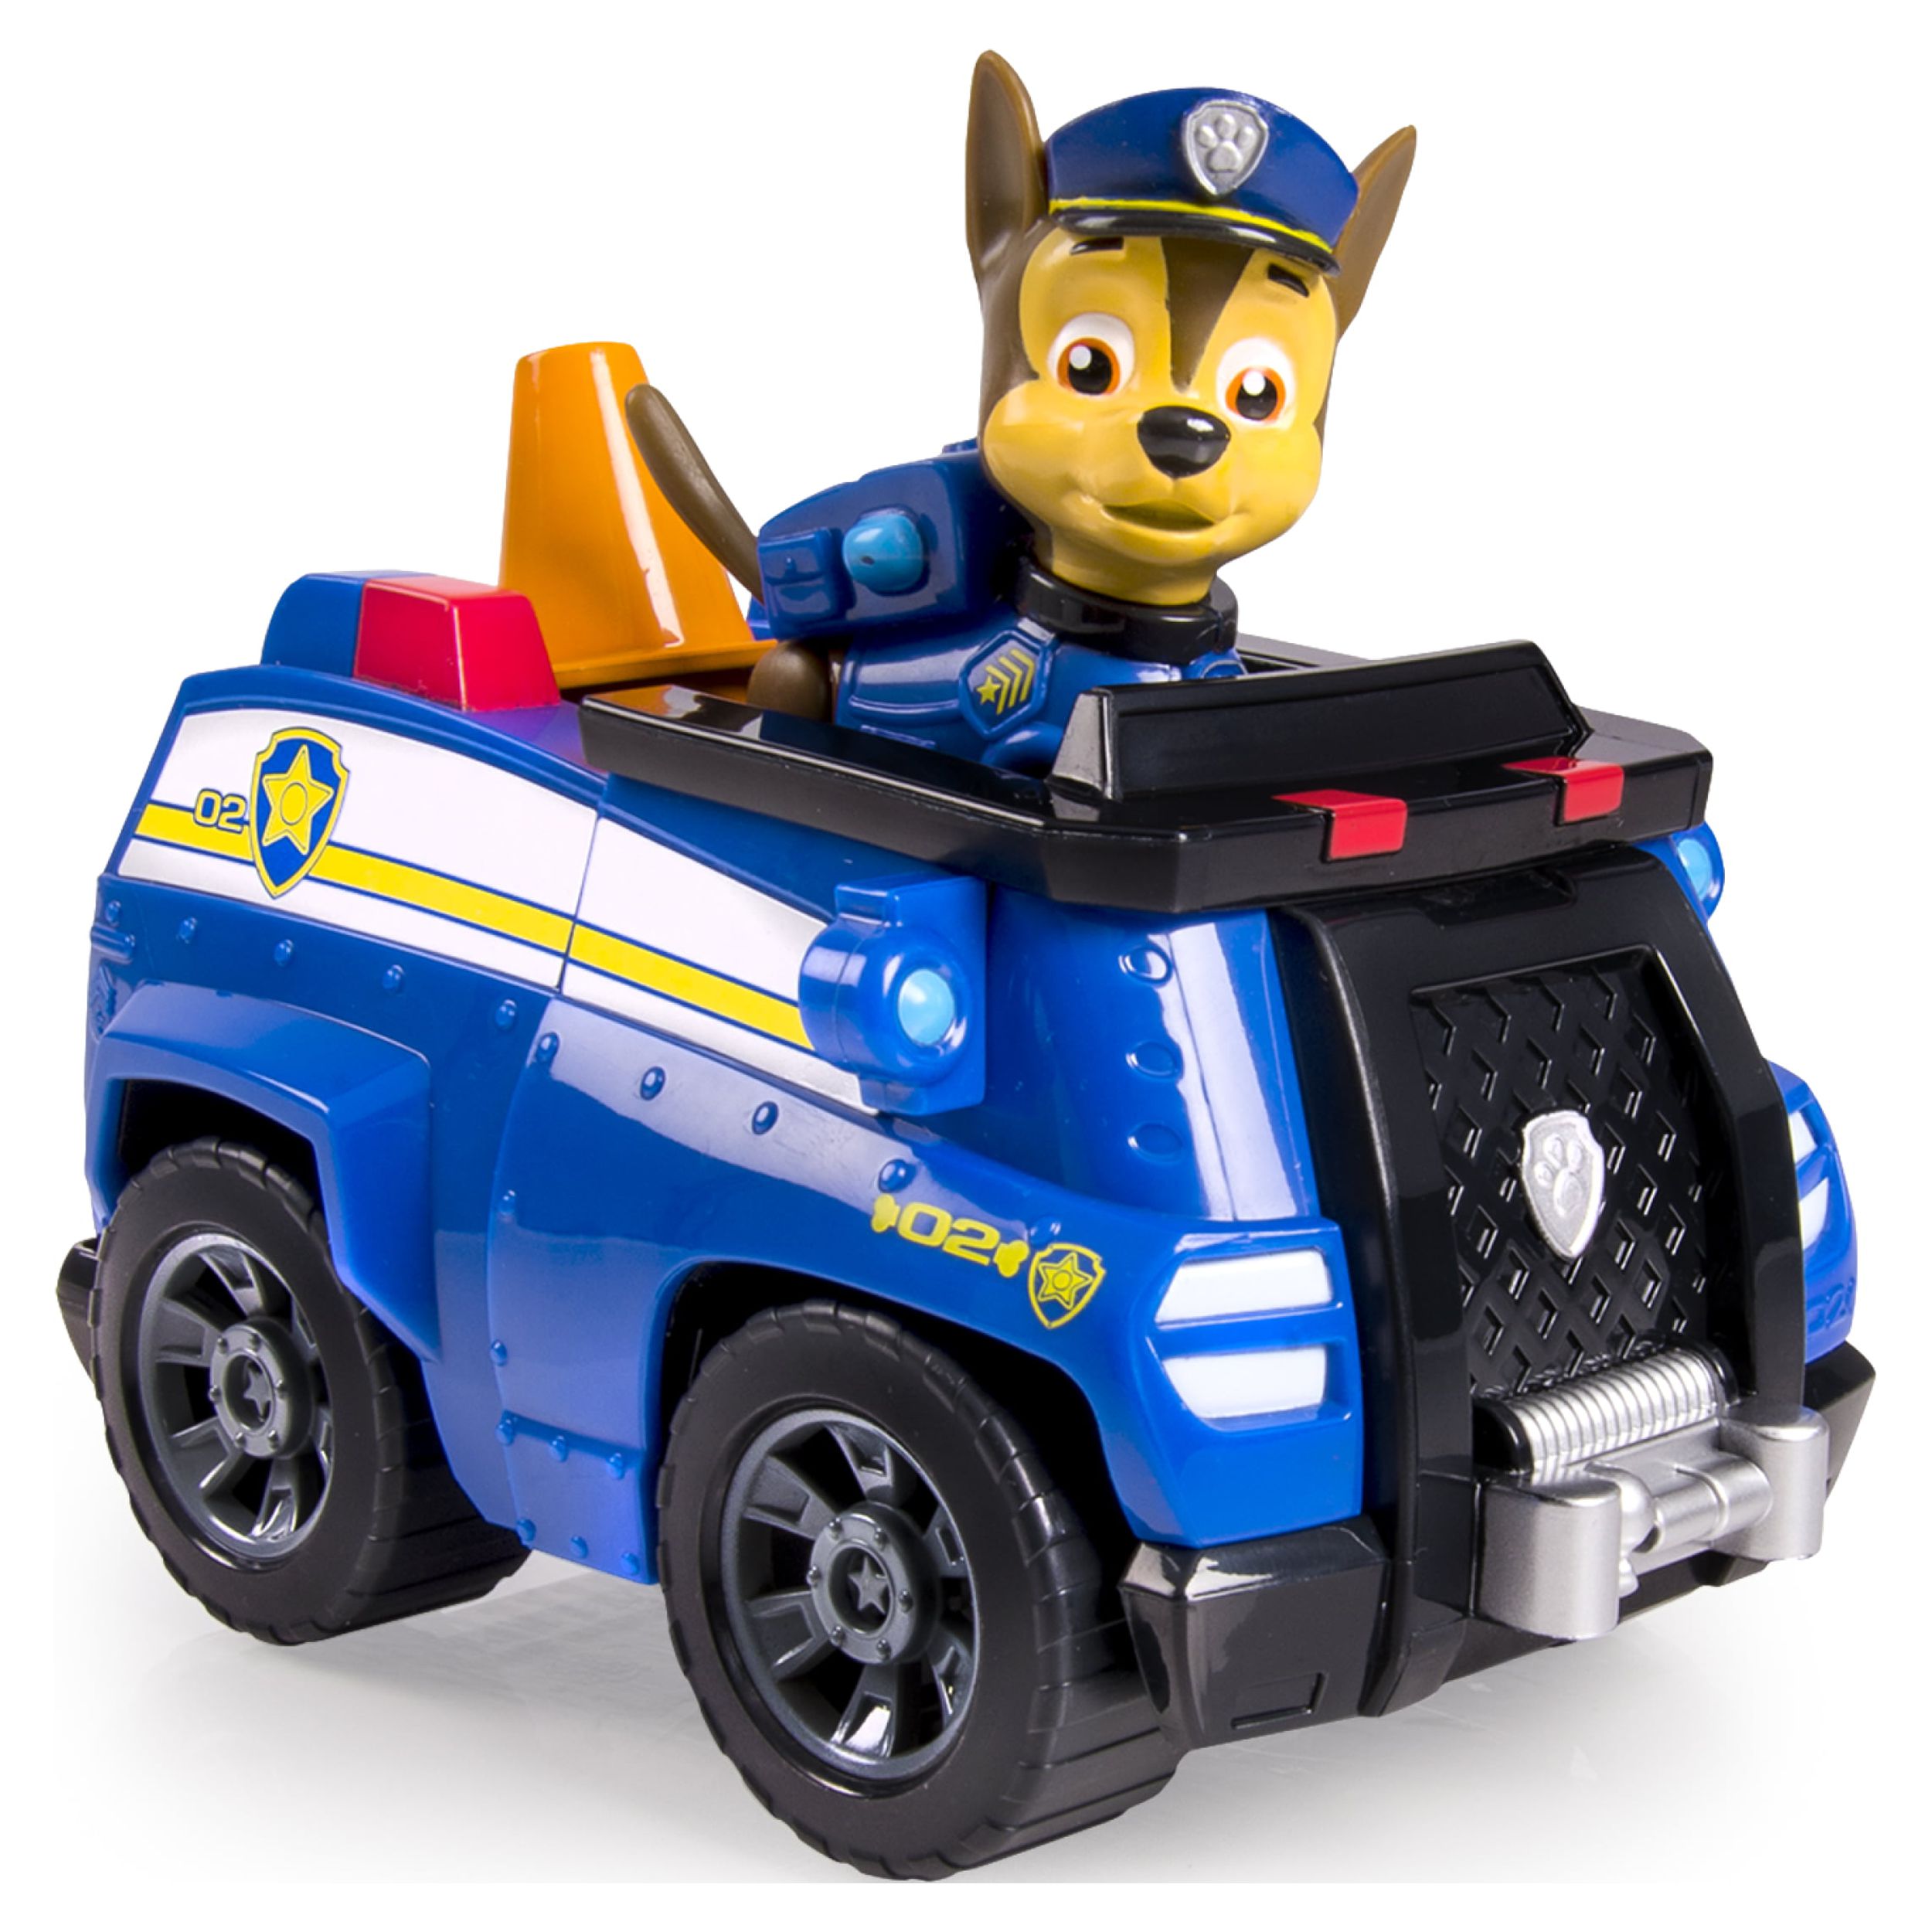 Paw Patrol Chase's Cruiser, Vehicle and Figure - image 2 of 6